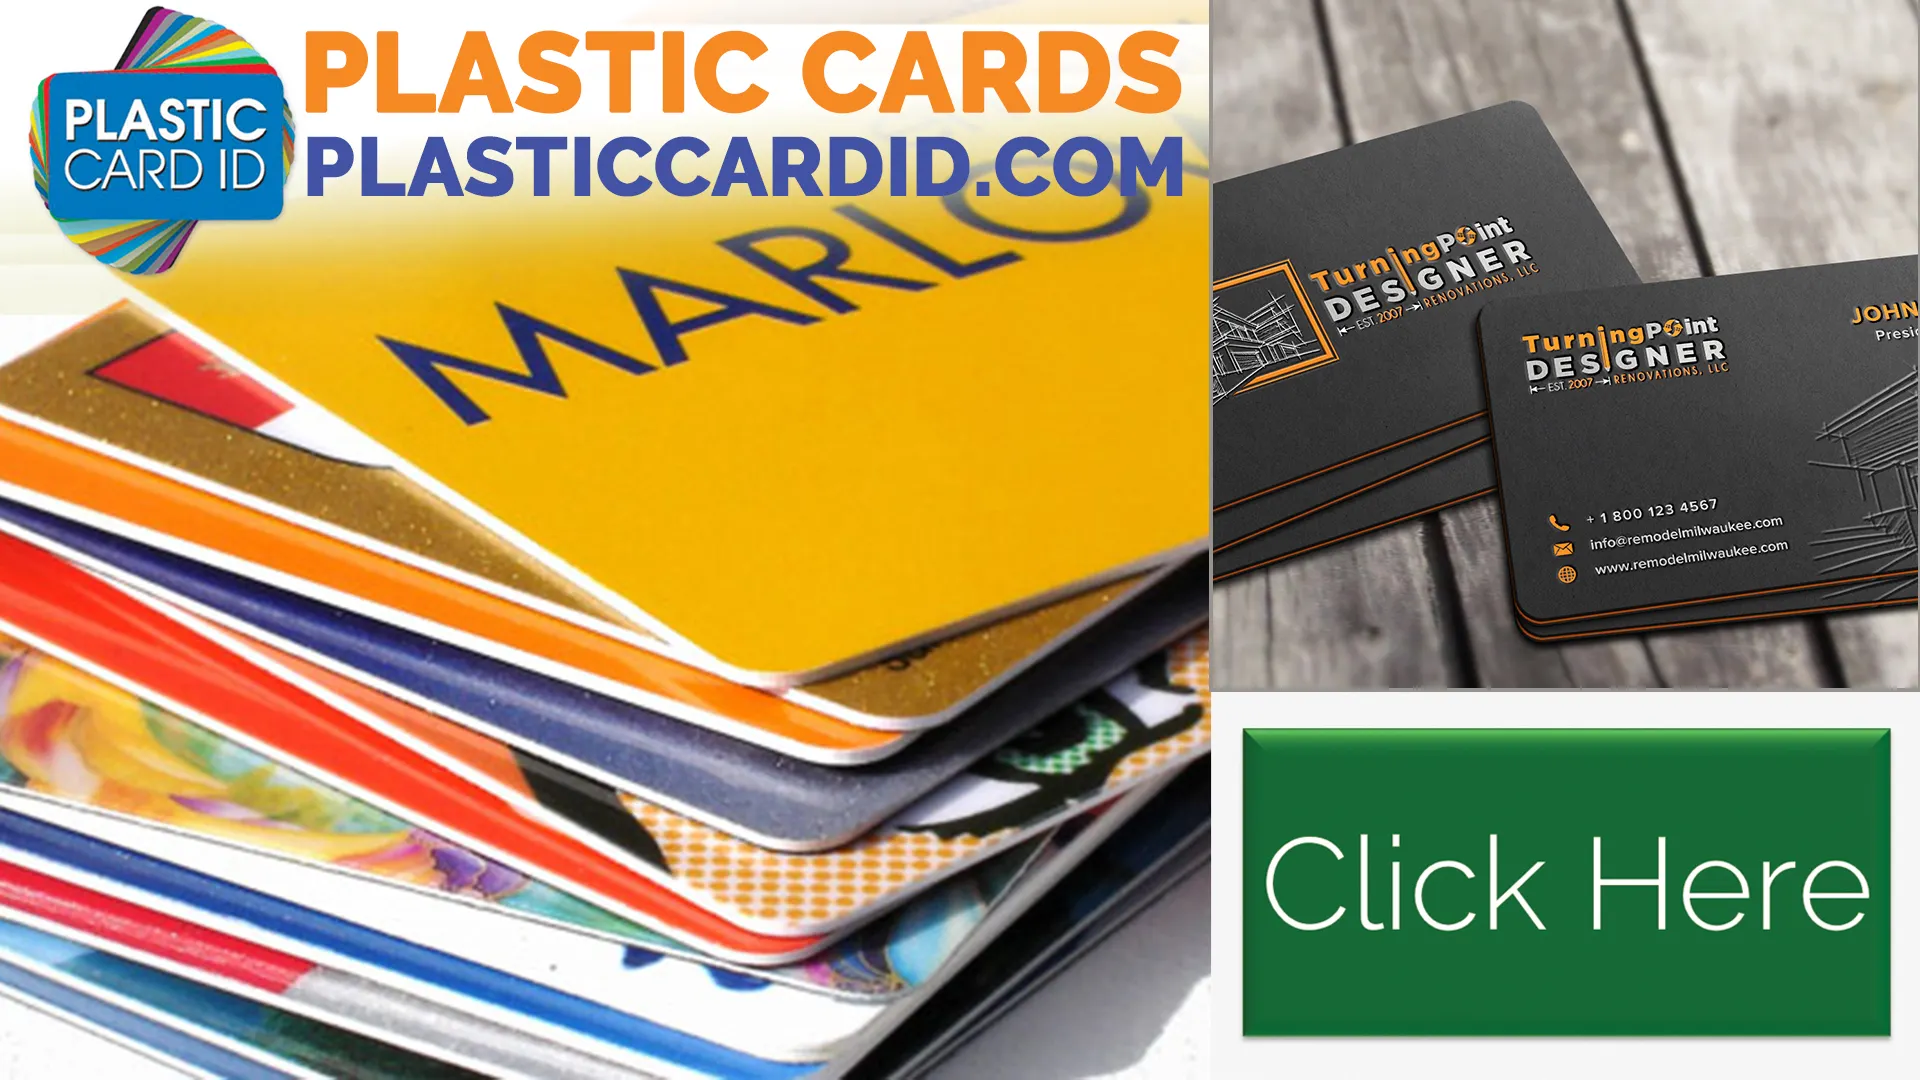 Welcome to the World of High-Quality Printed Plastic Cards